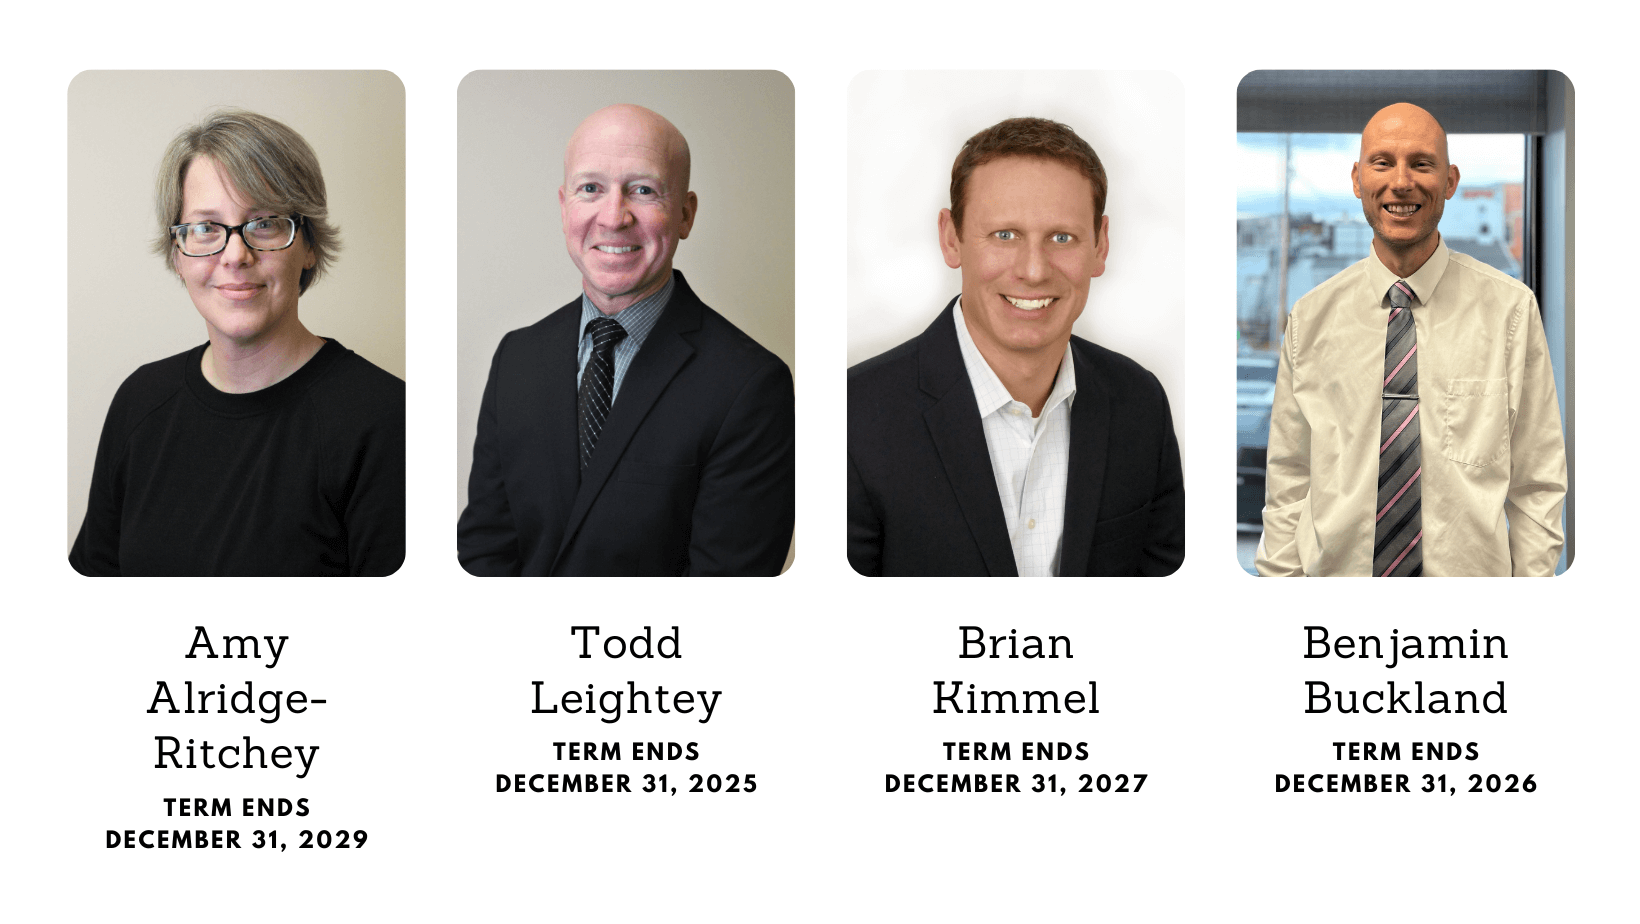 One women and three men in business attire. Text says Amy Alridge-Ritchey, term ends December 31, 2029. Todd Leightey, term ends December 31, 2025. Brian Kimmel, term ends December 31, 2027. Benjamin Buckland, term ends December 31, 2026.